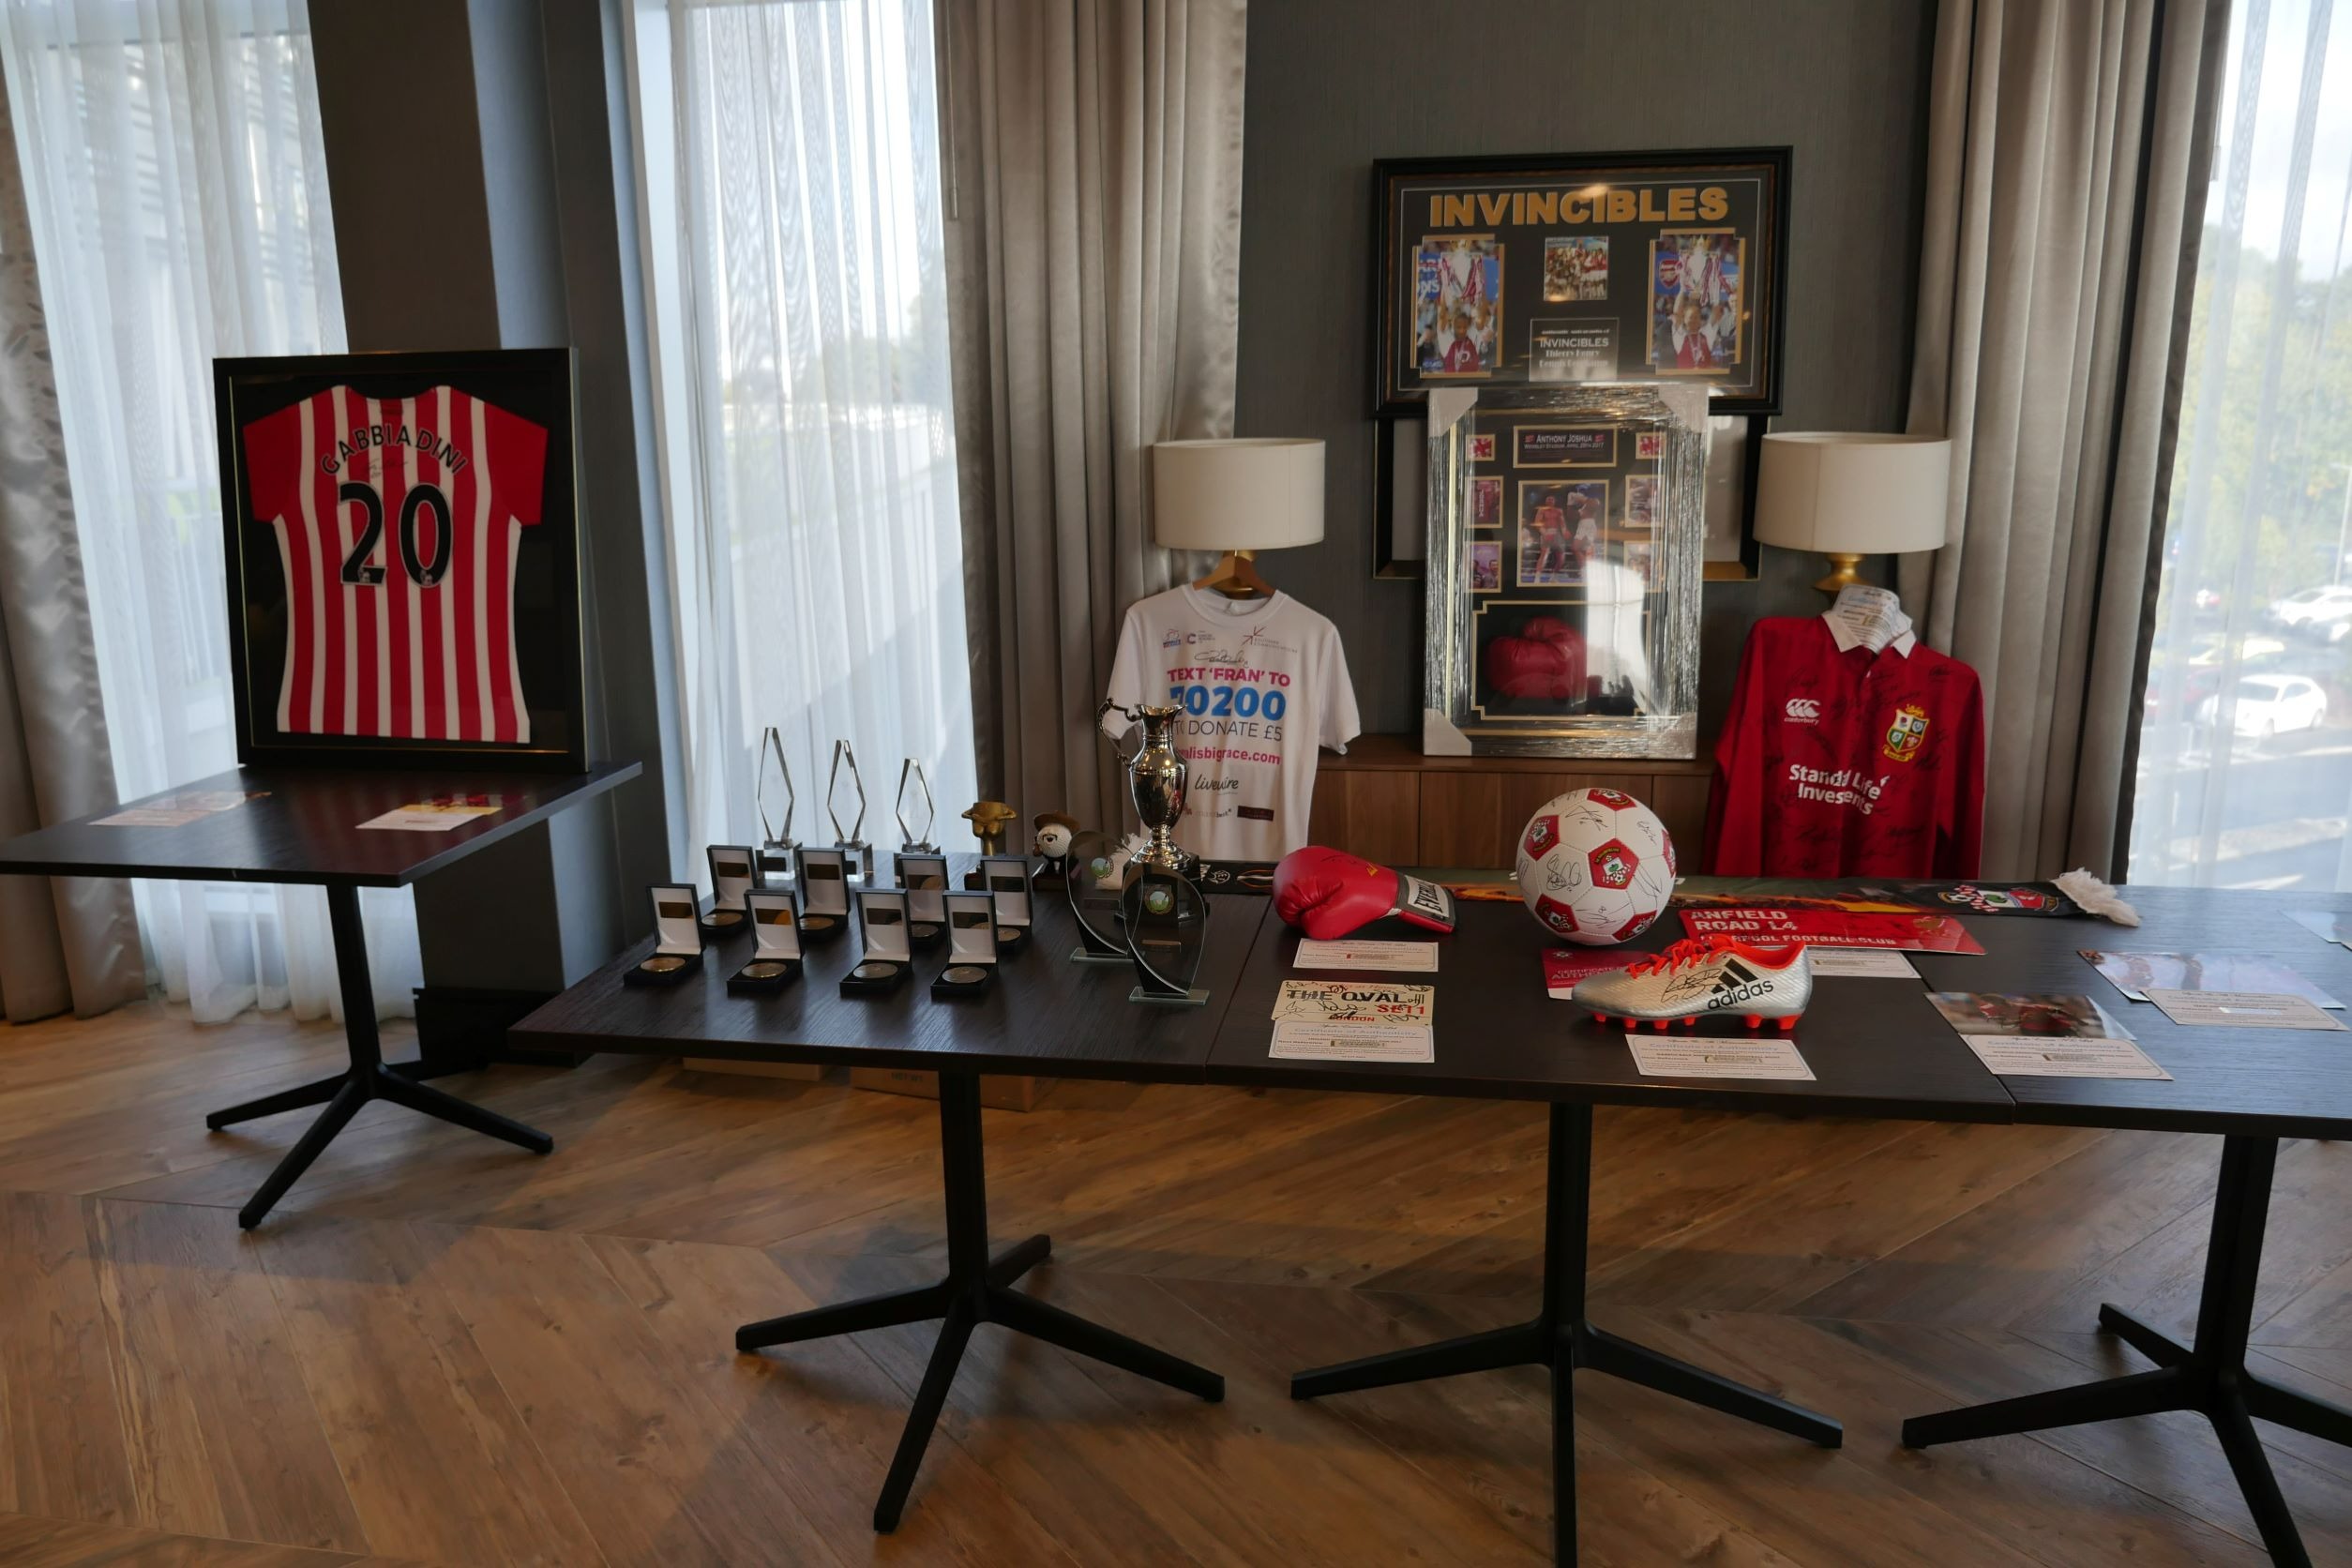 A display of Auction items from the inaugural 3D Personnel hosted event in 2017 